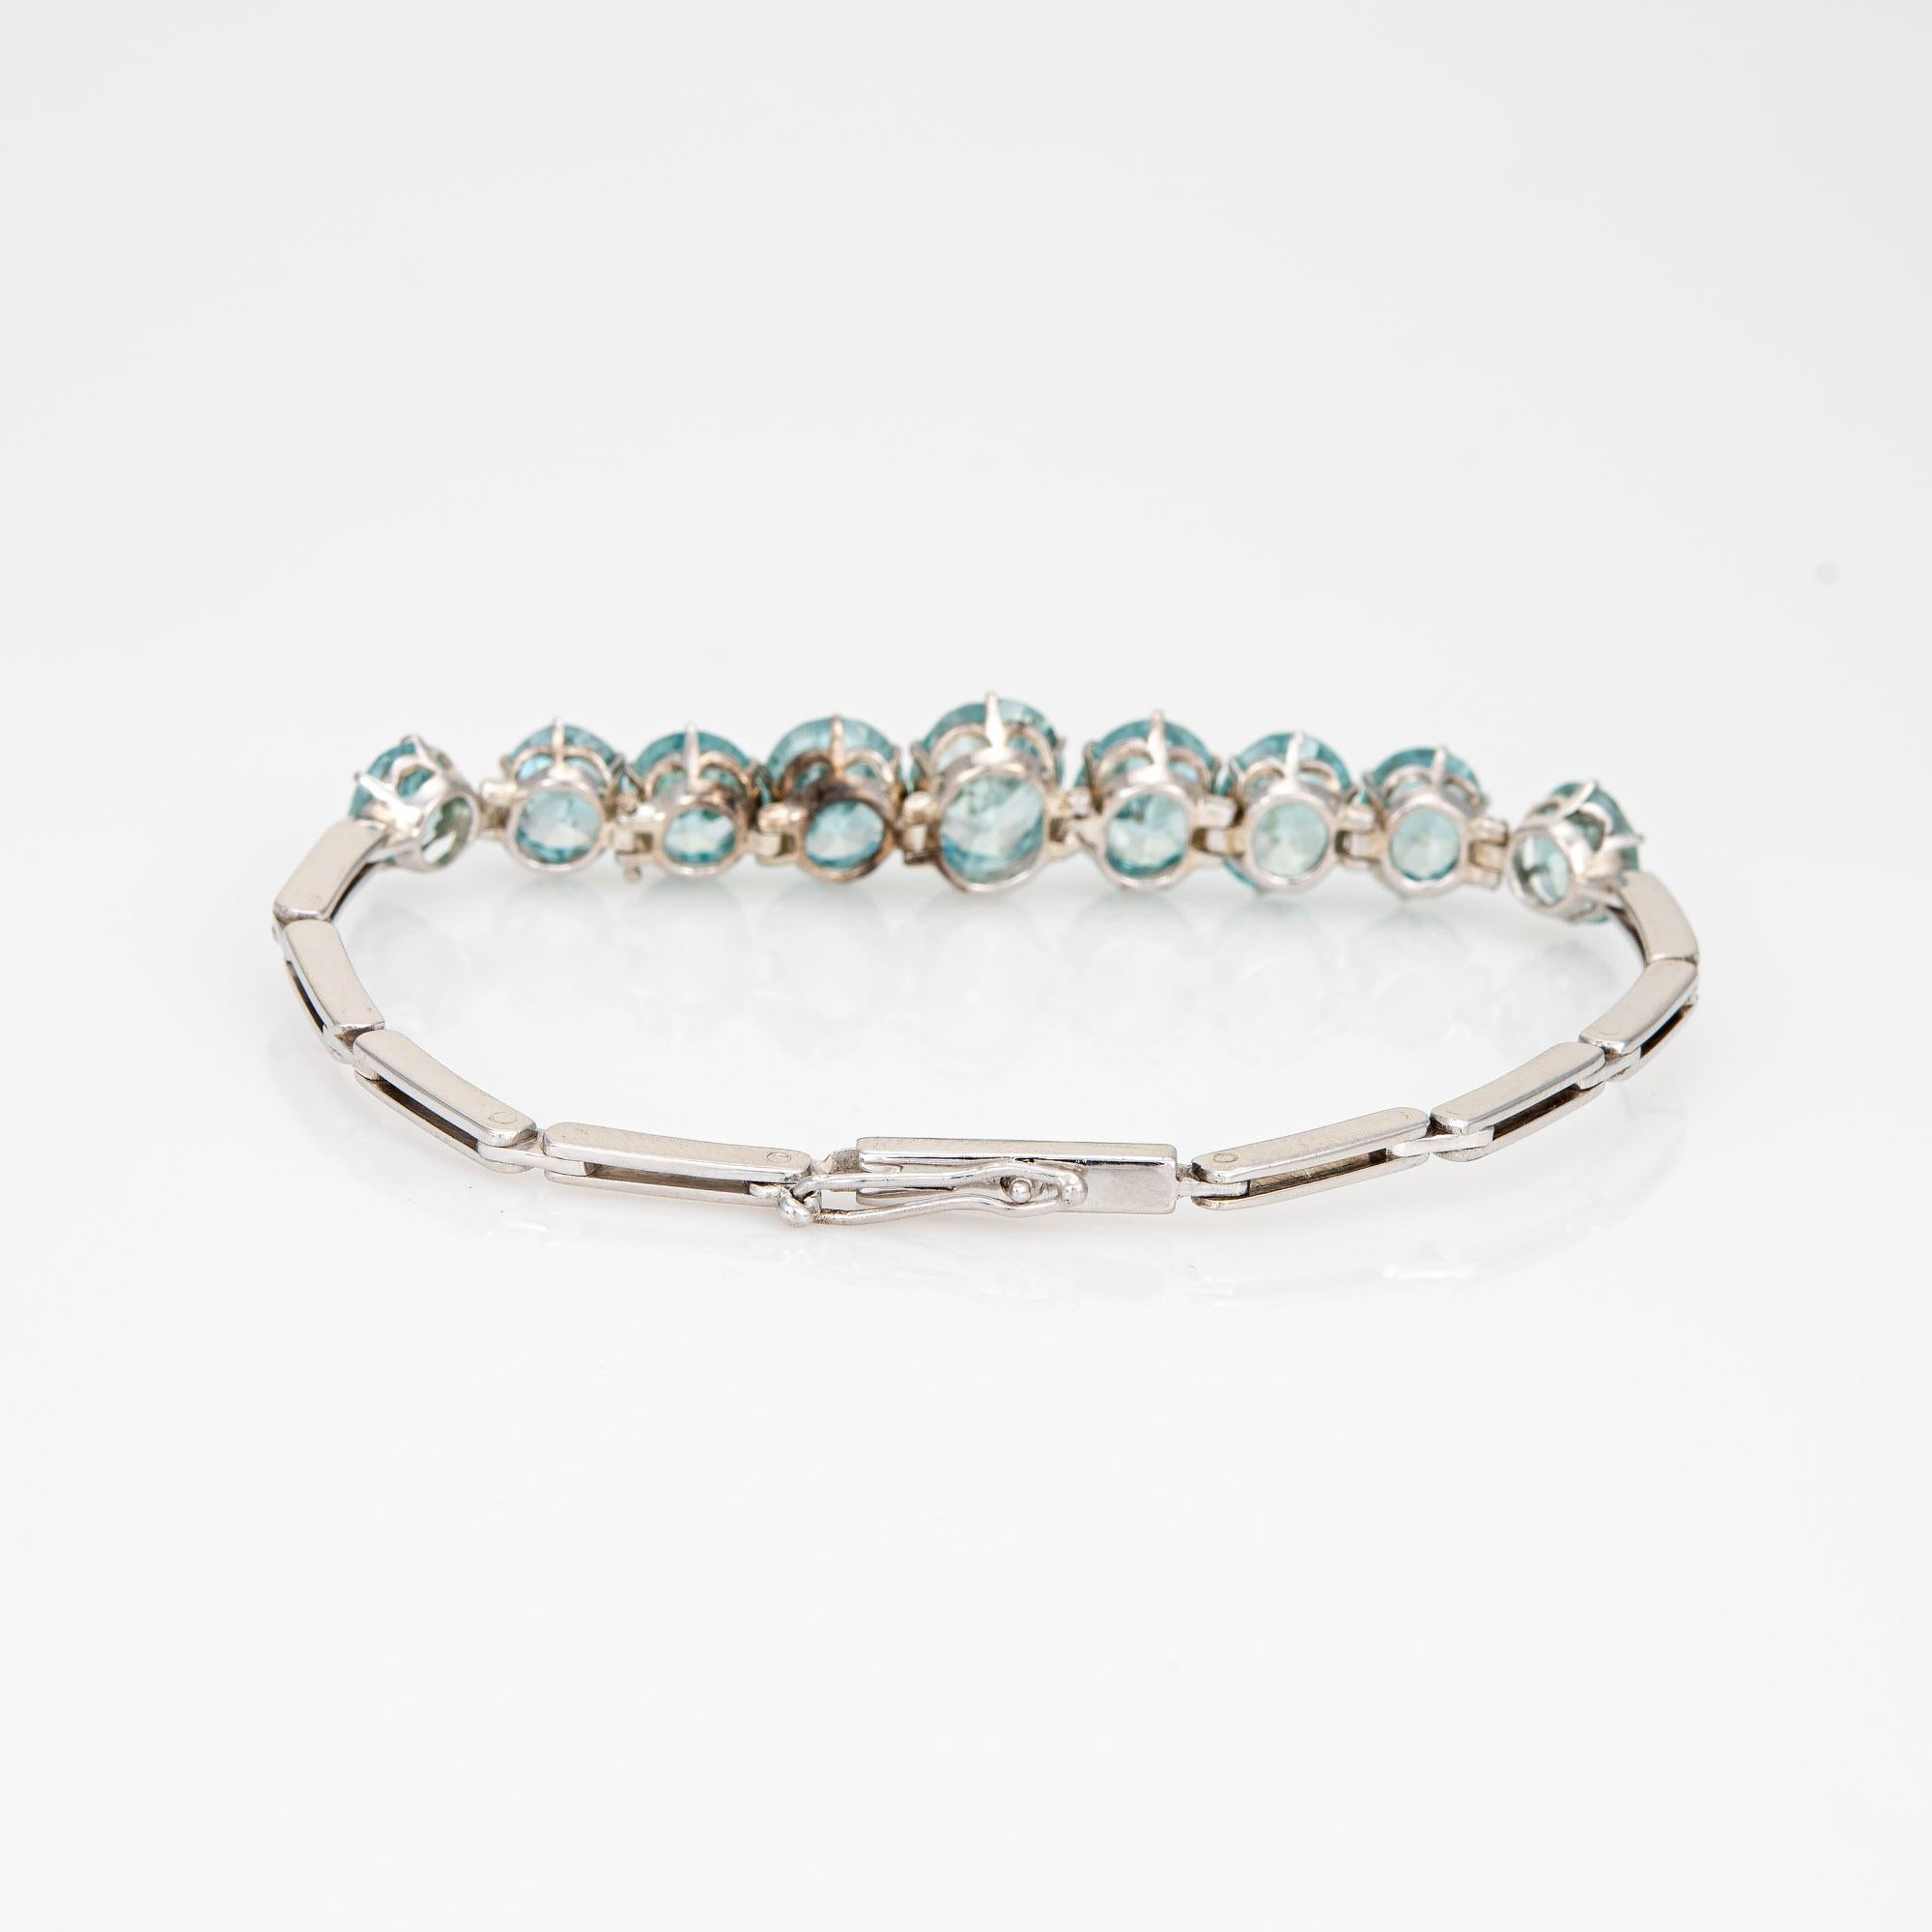 Finely detailed vintage blue zircon bracelet (circa 1920s to 1930s), crafted in 14 karat white gold. 

Faceted oval cut blue zircons range in size from 1.50 to 3.50 carats. The zircons are in very good condition and free of cracks or chips.  

The